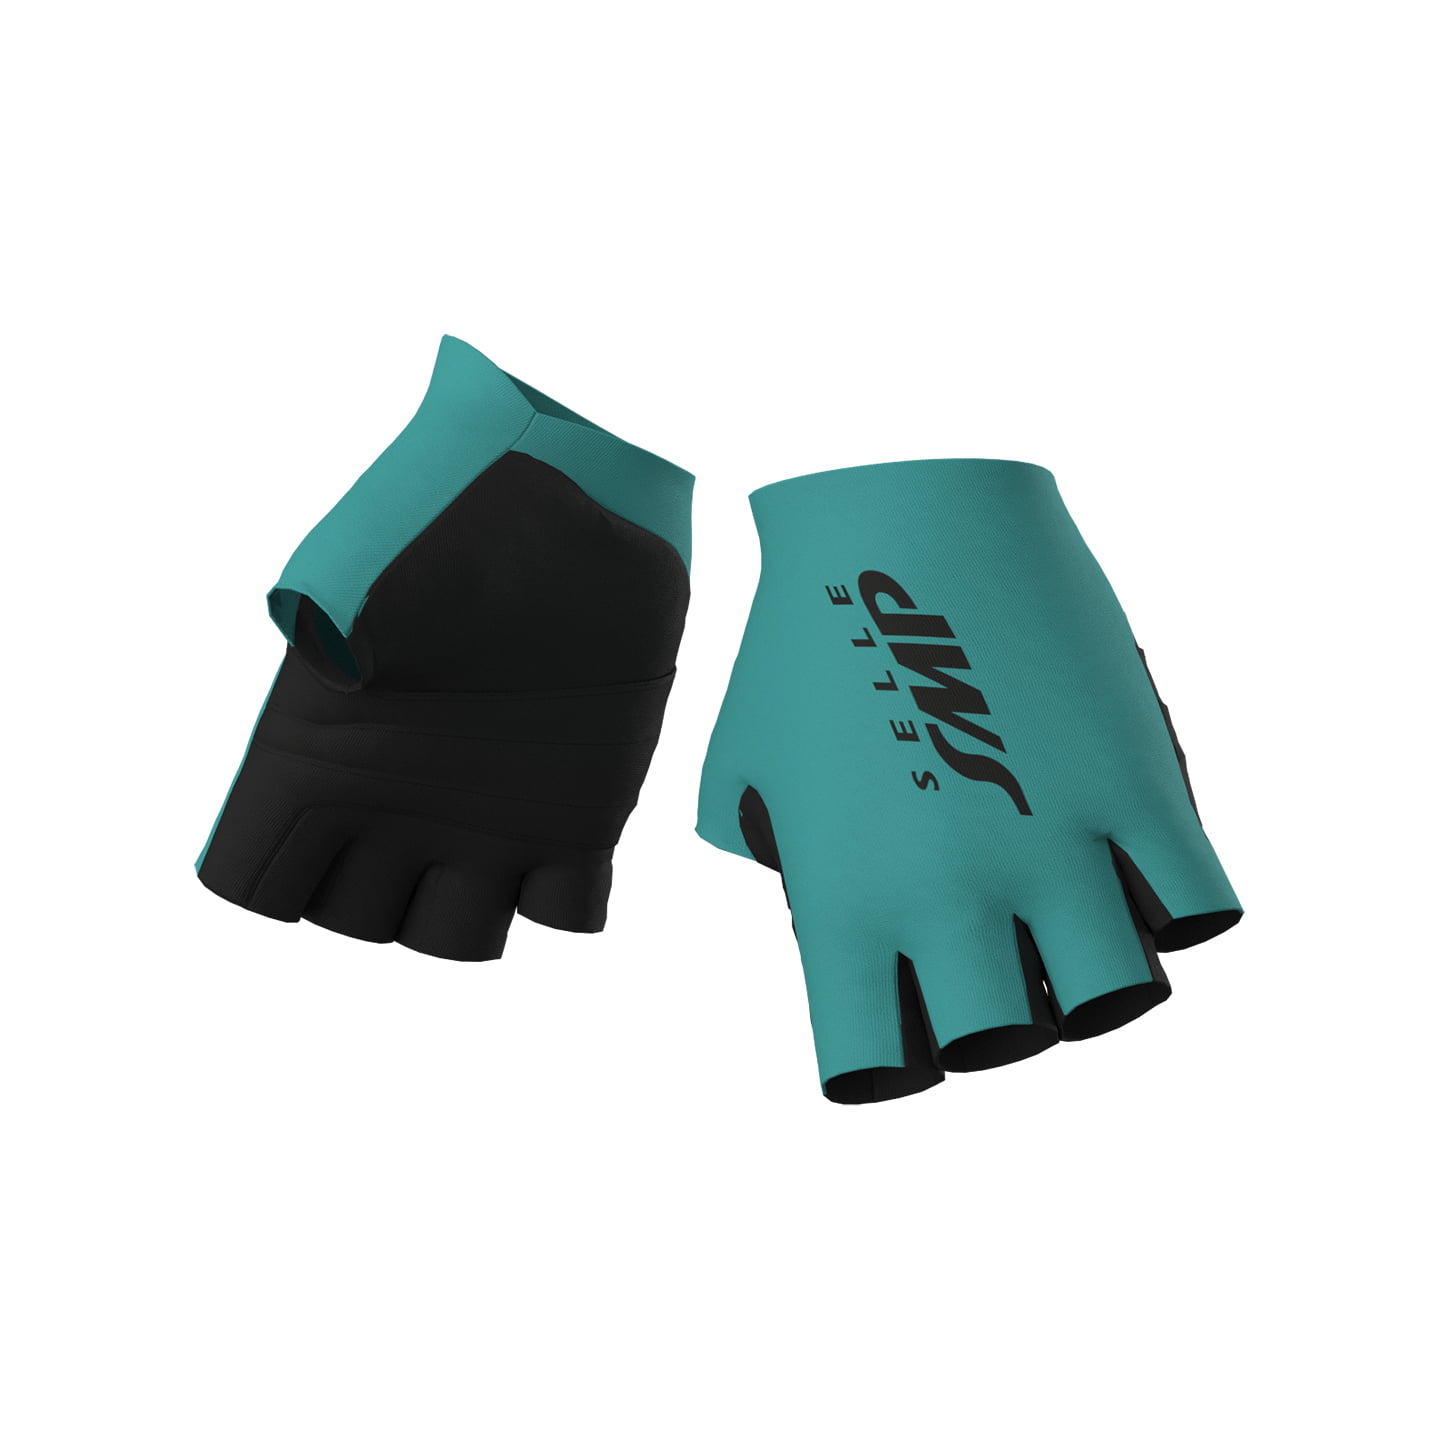 VF GROUP-BARDIANI CSF-FAIZANE 2024 Cycling Gloves, for men, size 2XL, Cycling gloves, Cycle clothing